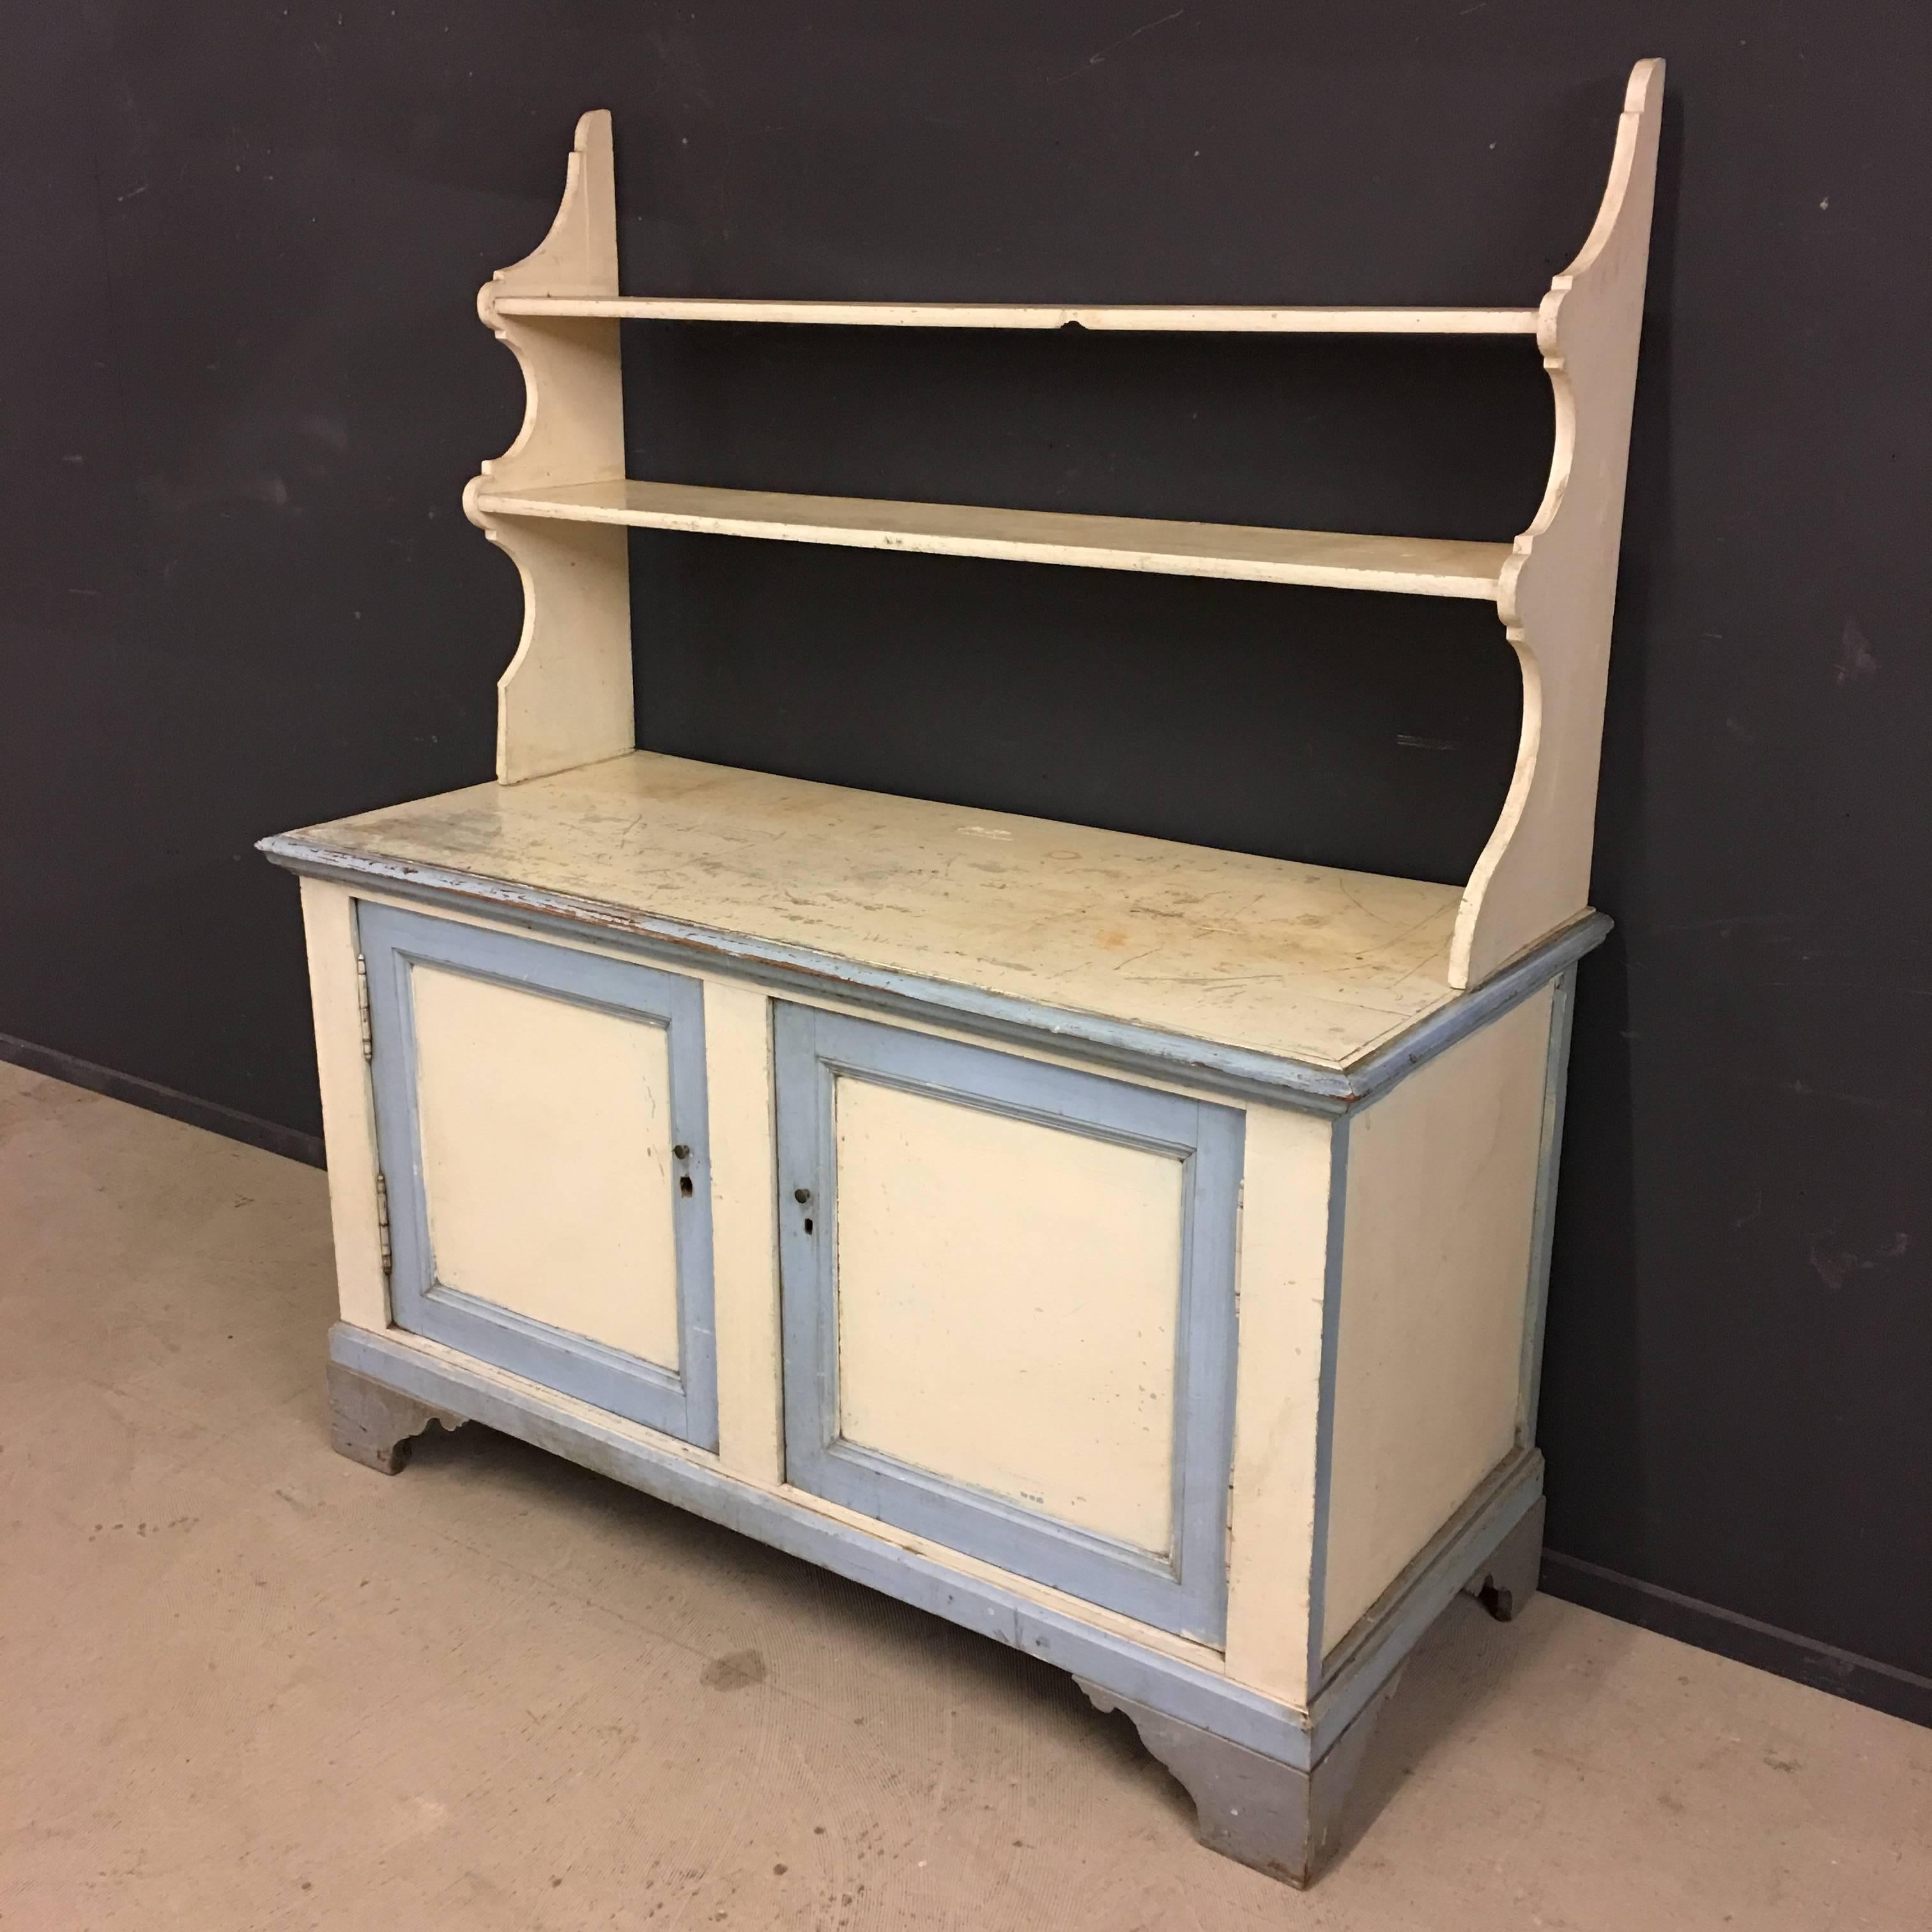 Anique painted 19th century cabinet from a French chateau. Original paint with nice patina. This cabinet remains in very good condition.